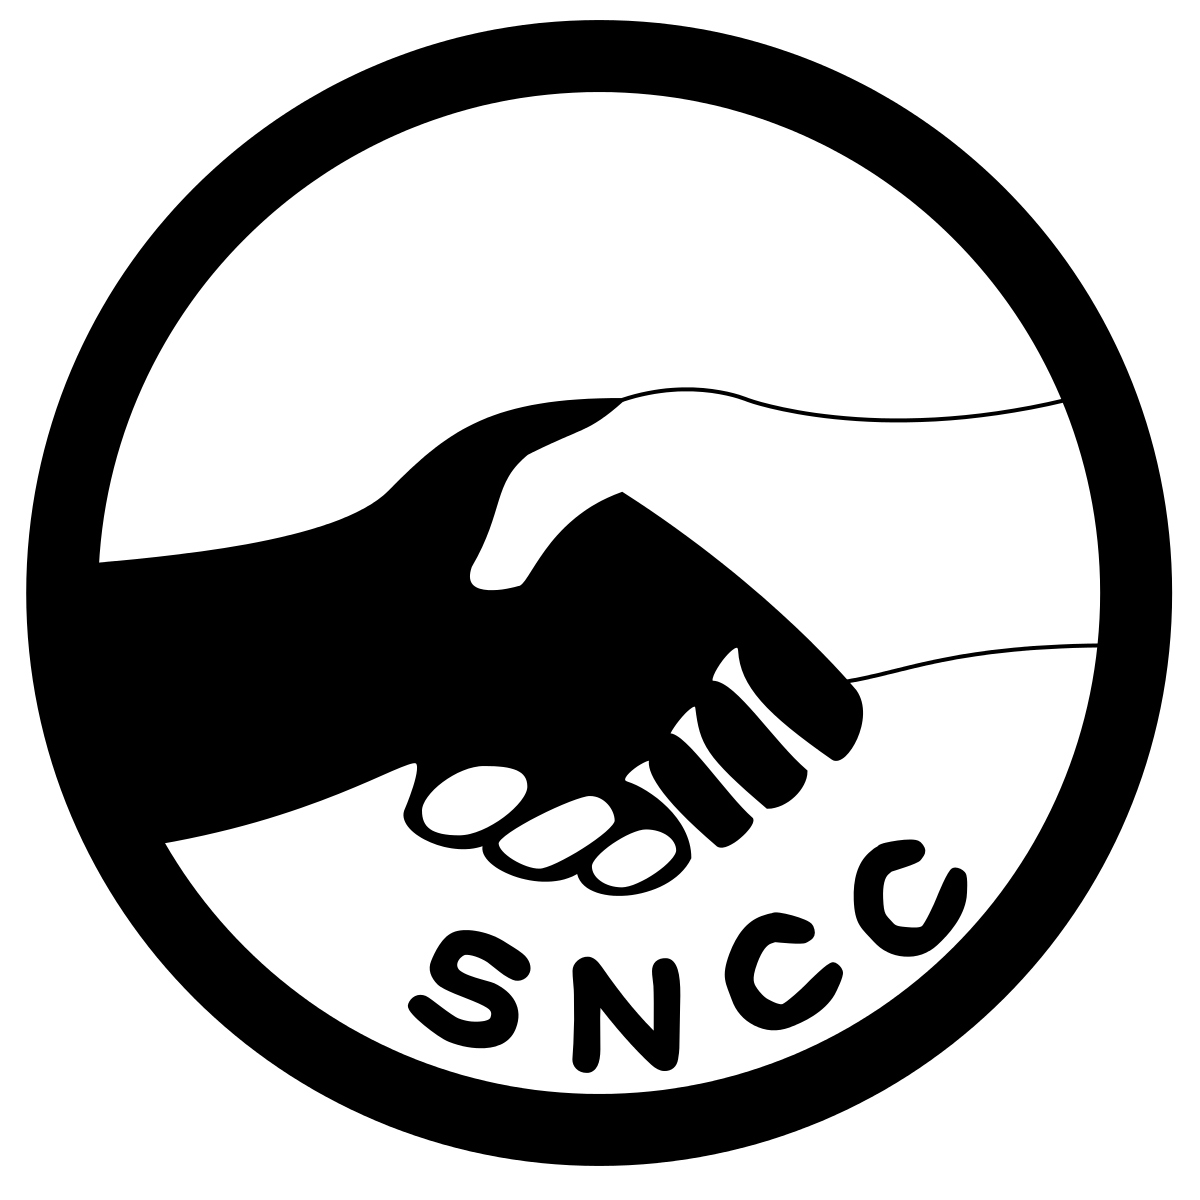 Student nonviolent coordinating committee. Mlk clipart inauguration day